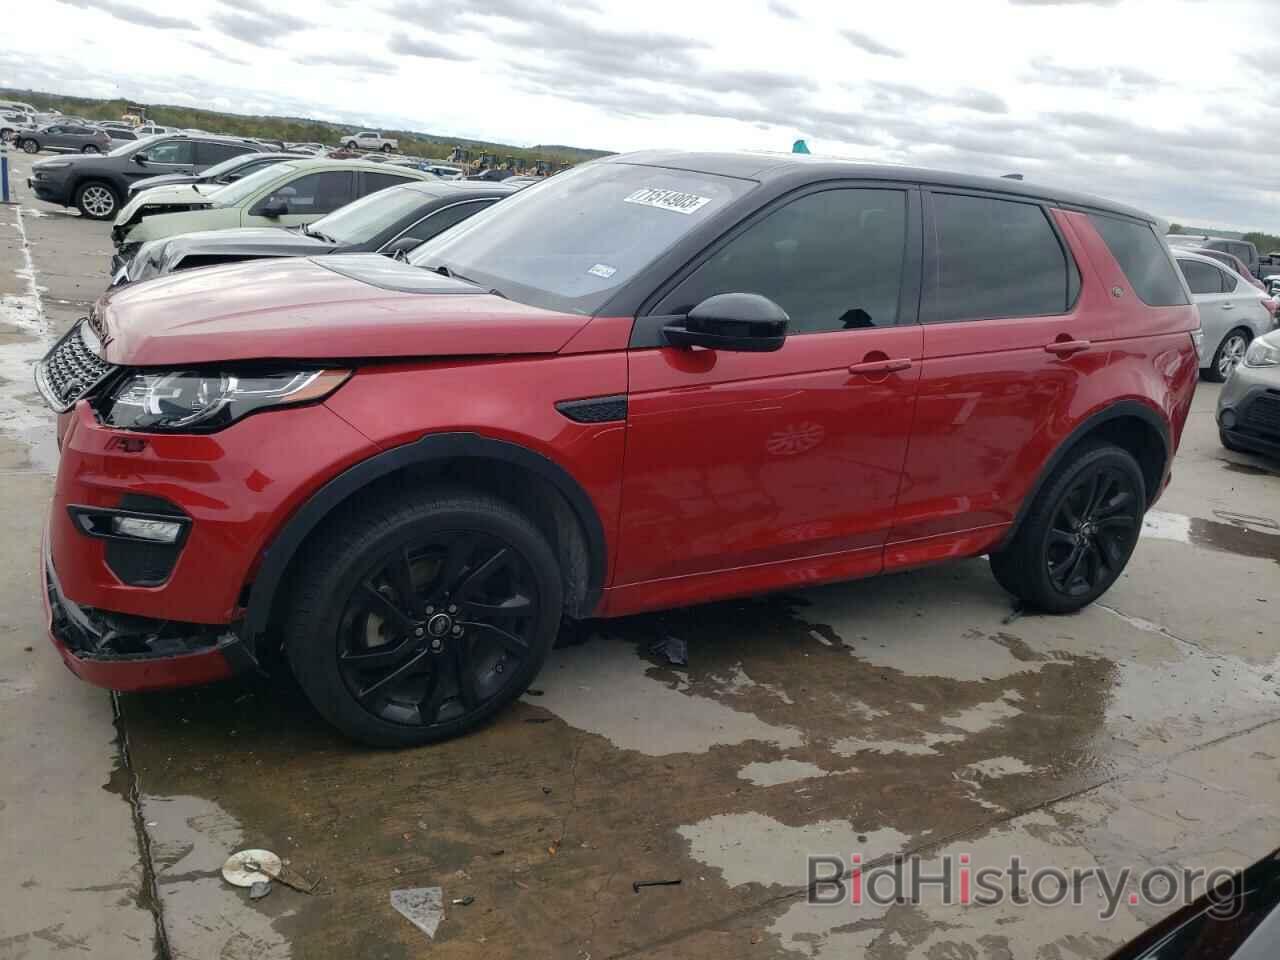 Фотография SALCT2RX4JH766955 - LAND ROVER DISCOVERY 2018